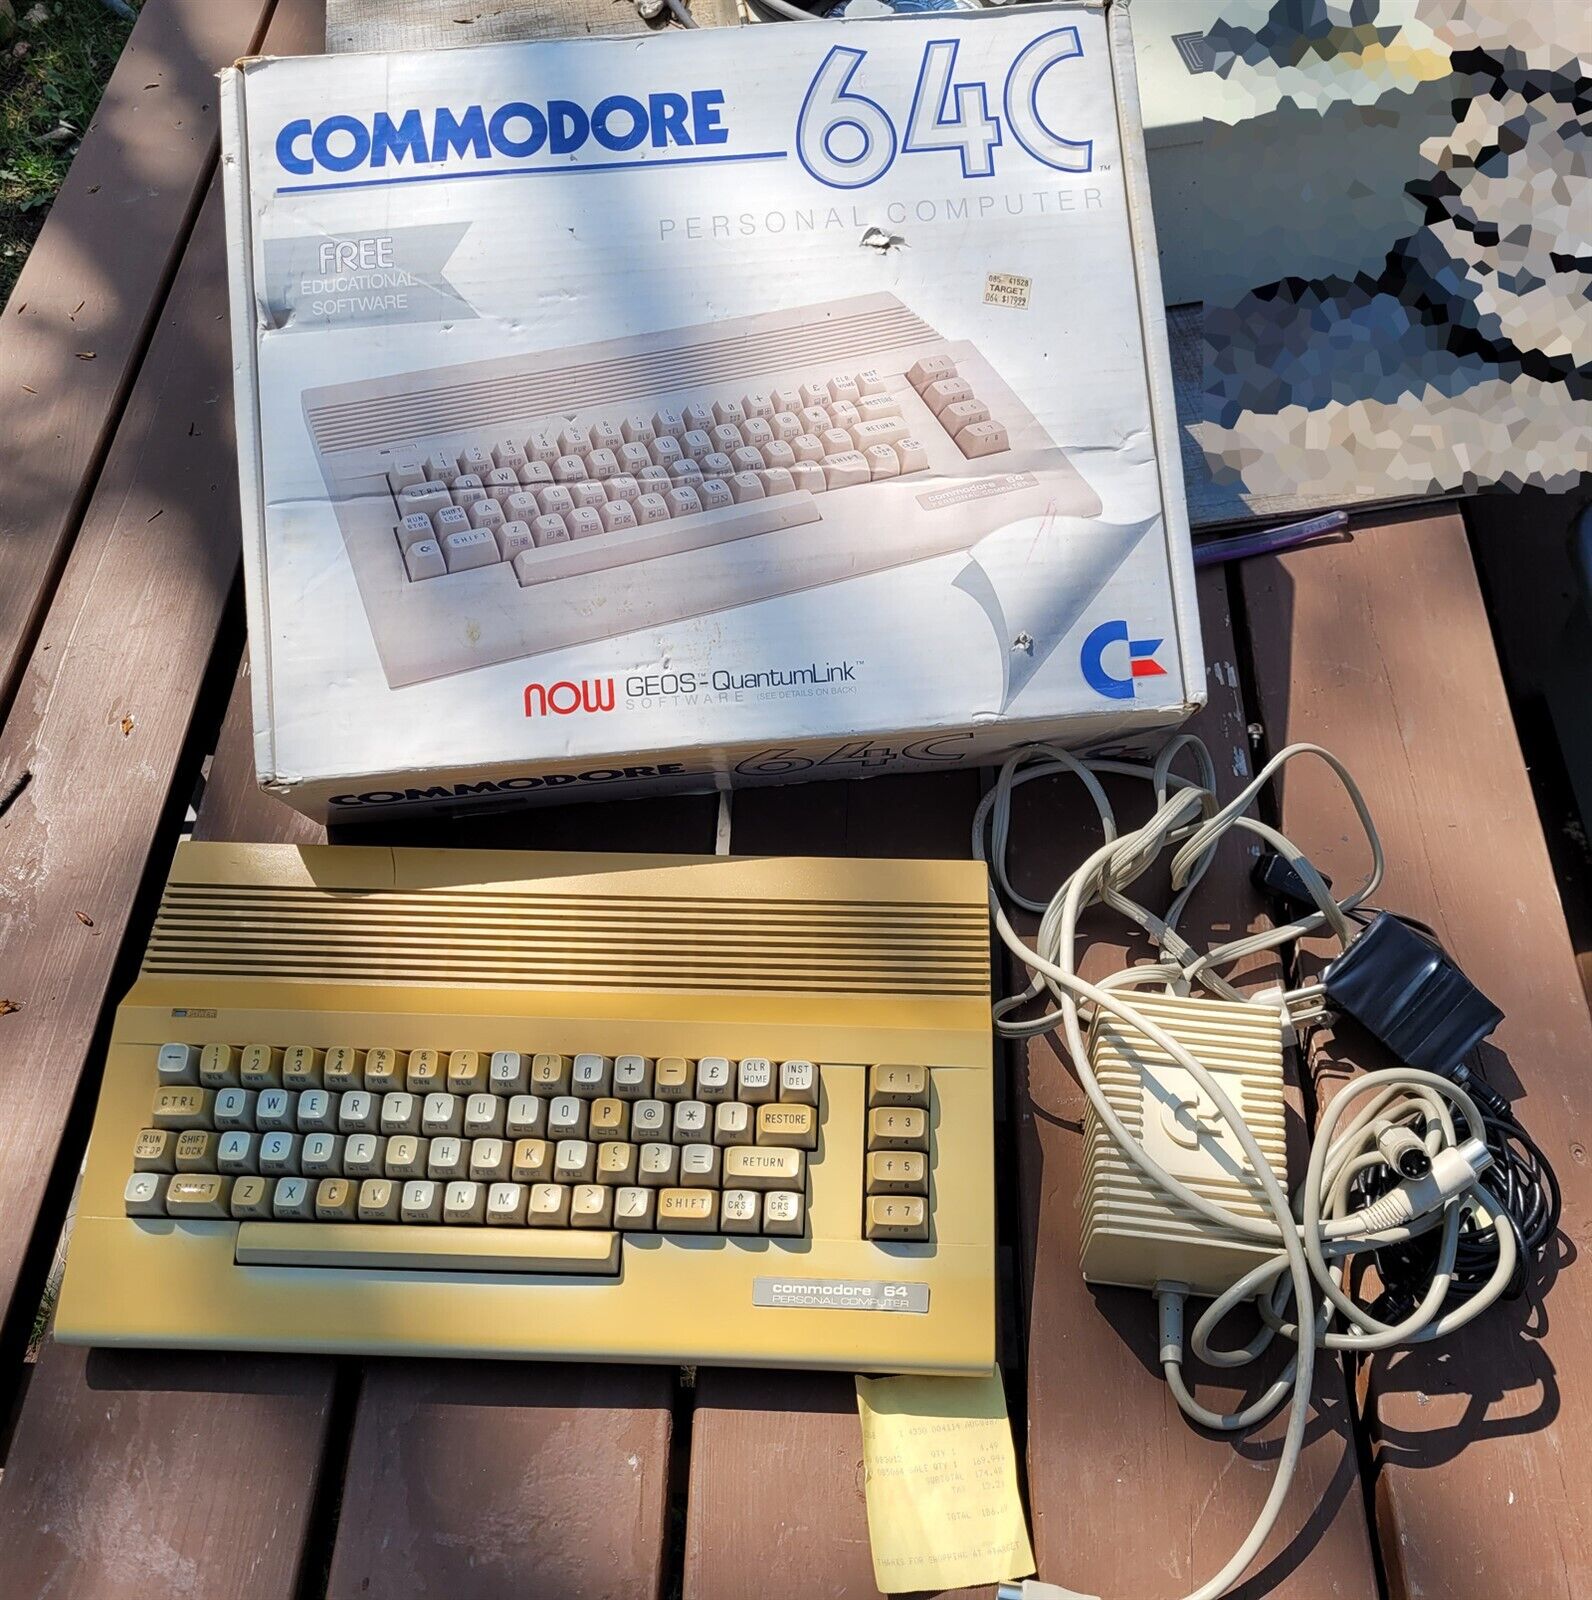 COMMODORE 64C Vintage COMPUTER In Box w/ Original Receipt - TESTED